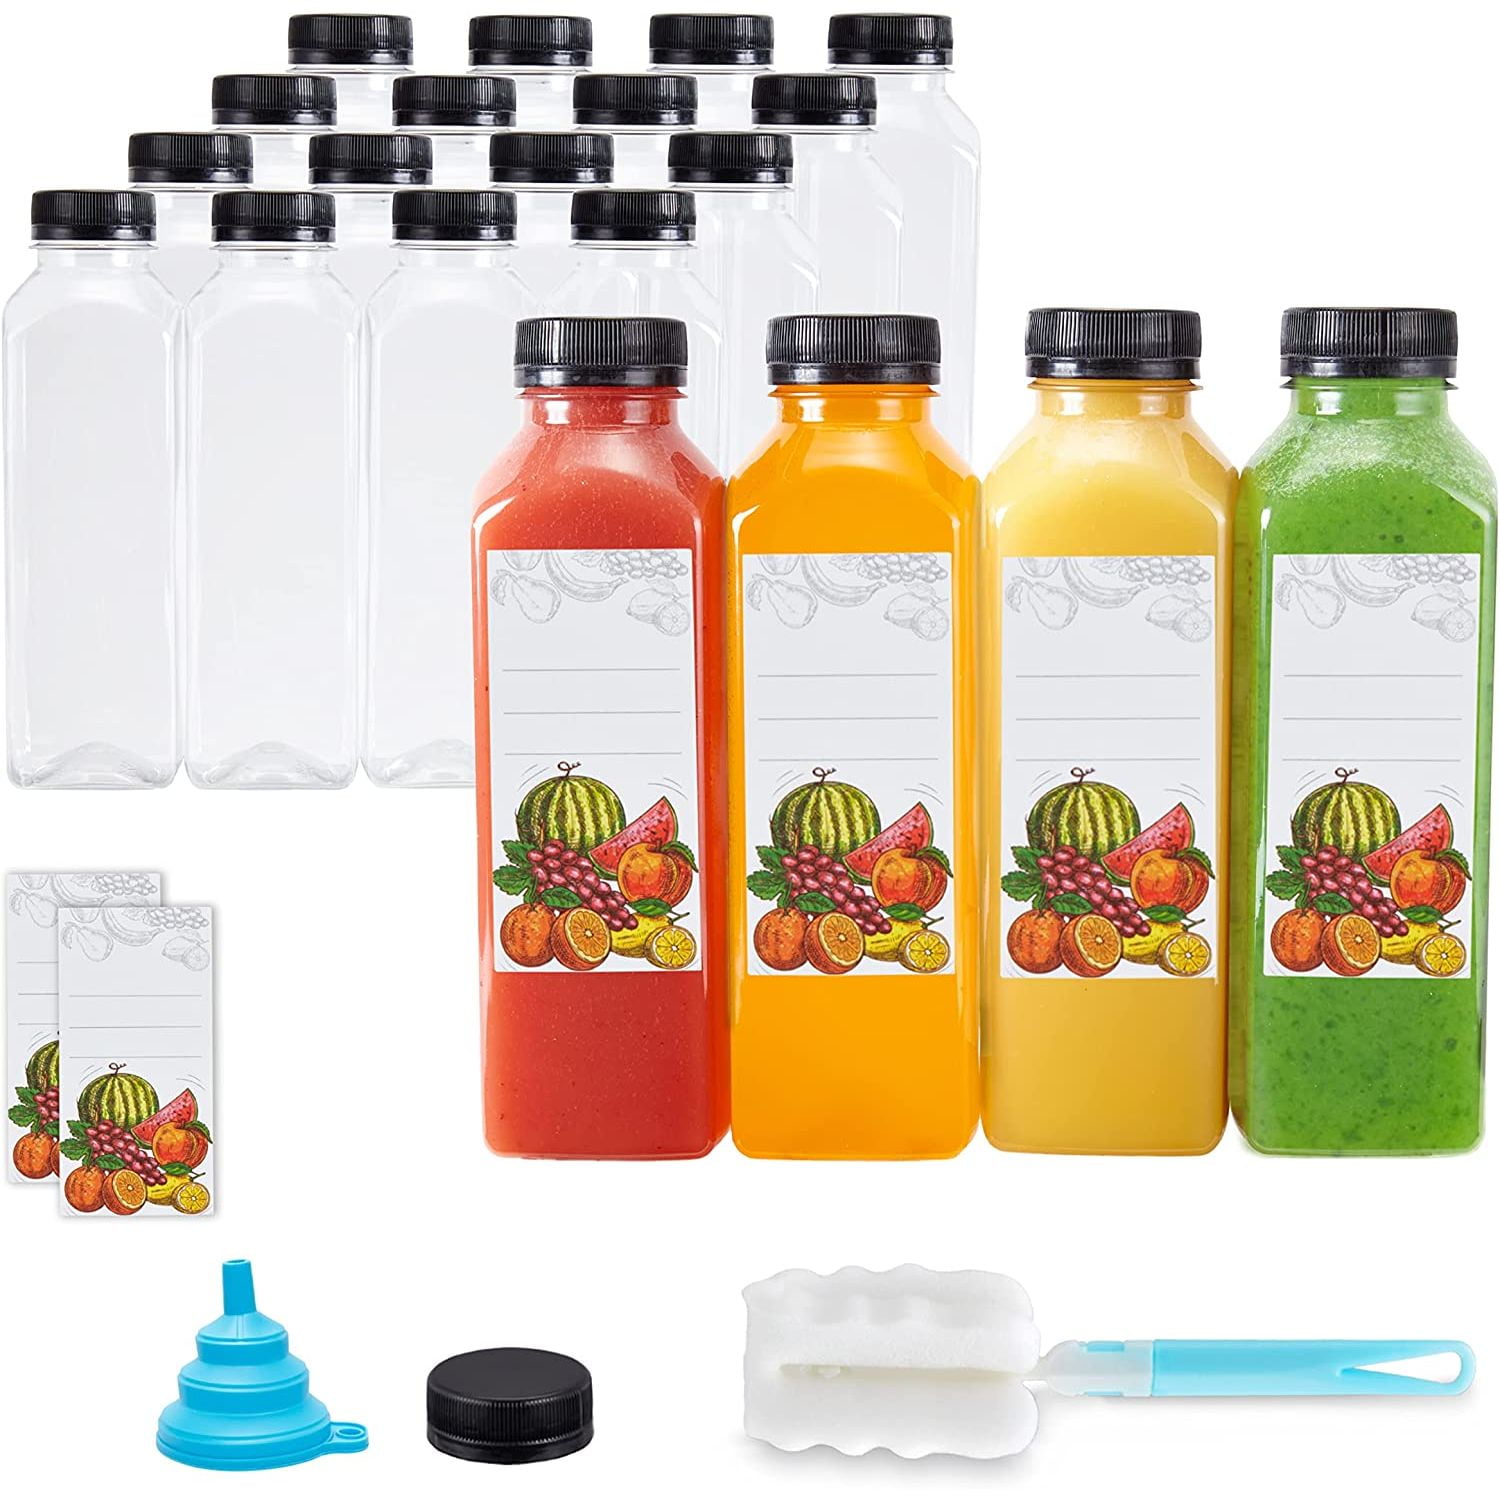 CUCUMI 8pcs 16oz Glass Juice Bottles with Lids, Reusable Juice Containers  Drinking Jars Water Cups w…See more CUCUMI 8pcs 16oz Glass Juice Bottles